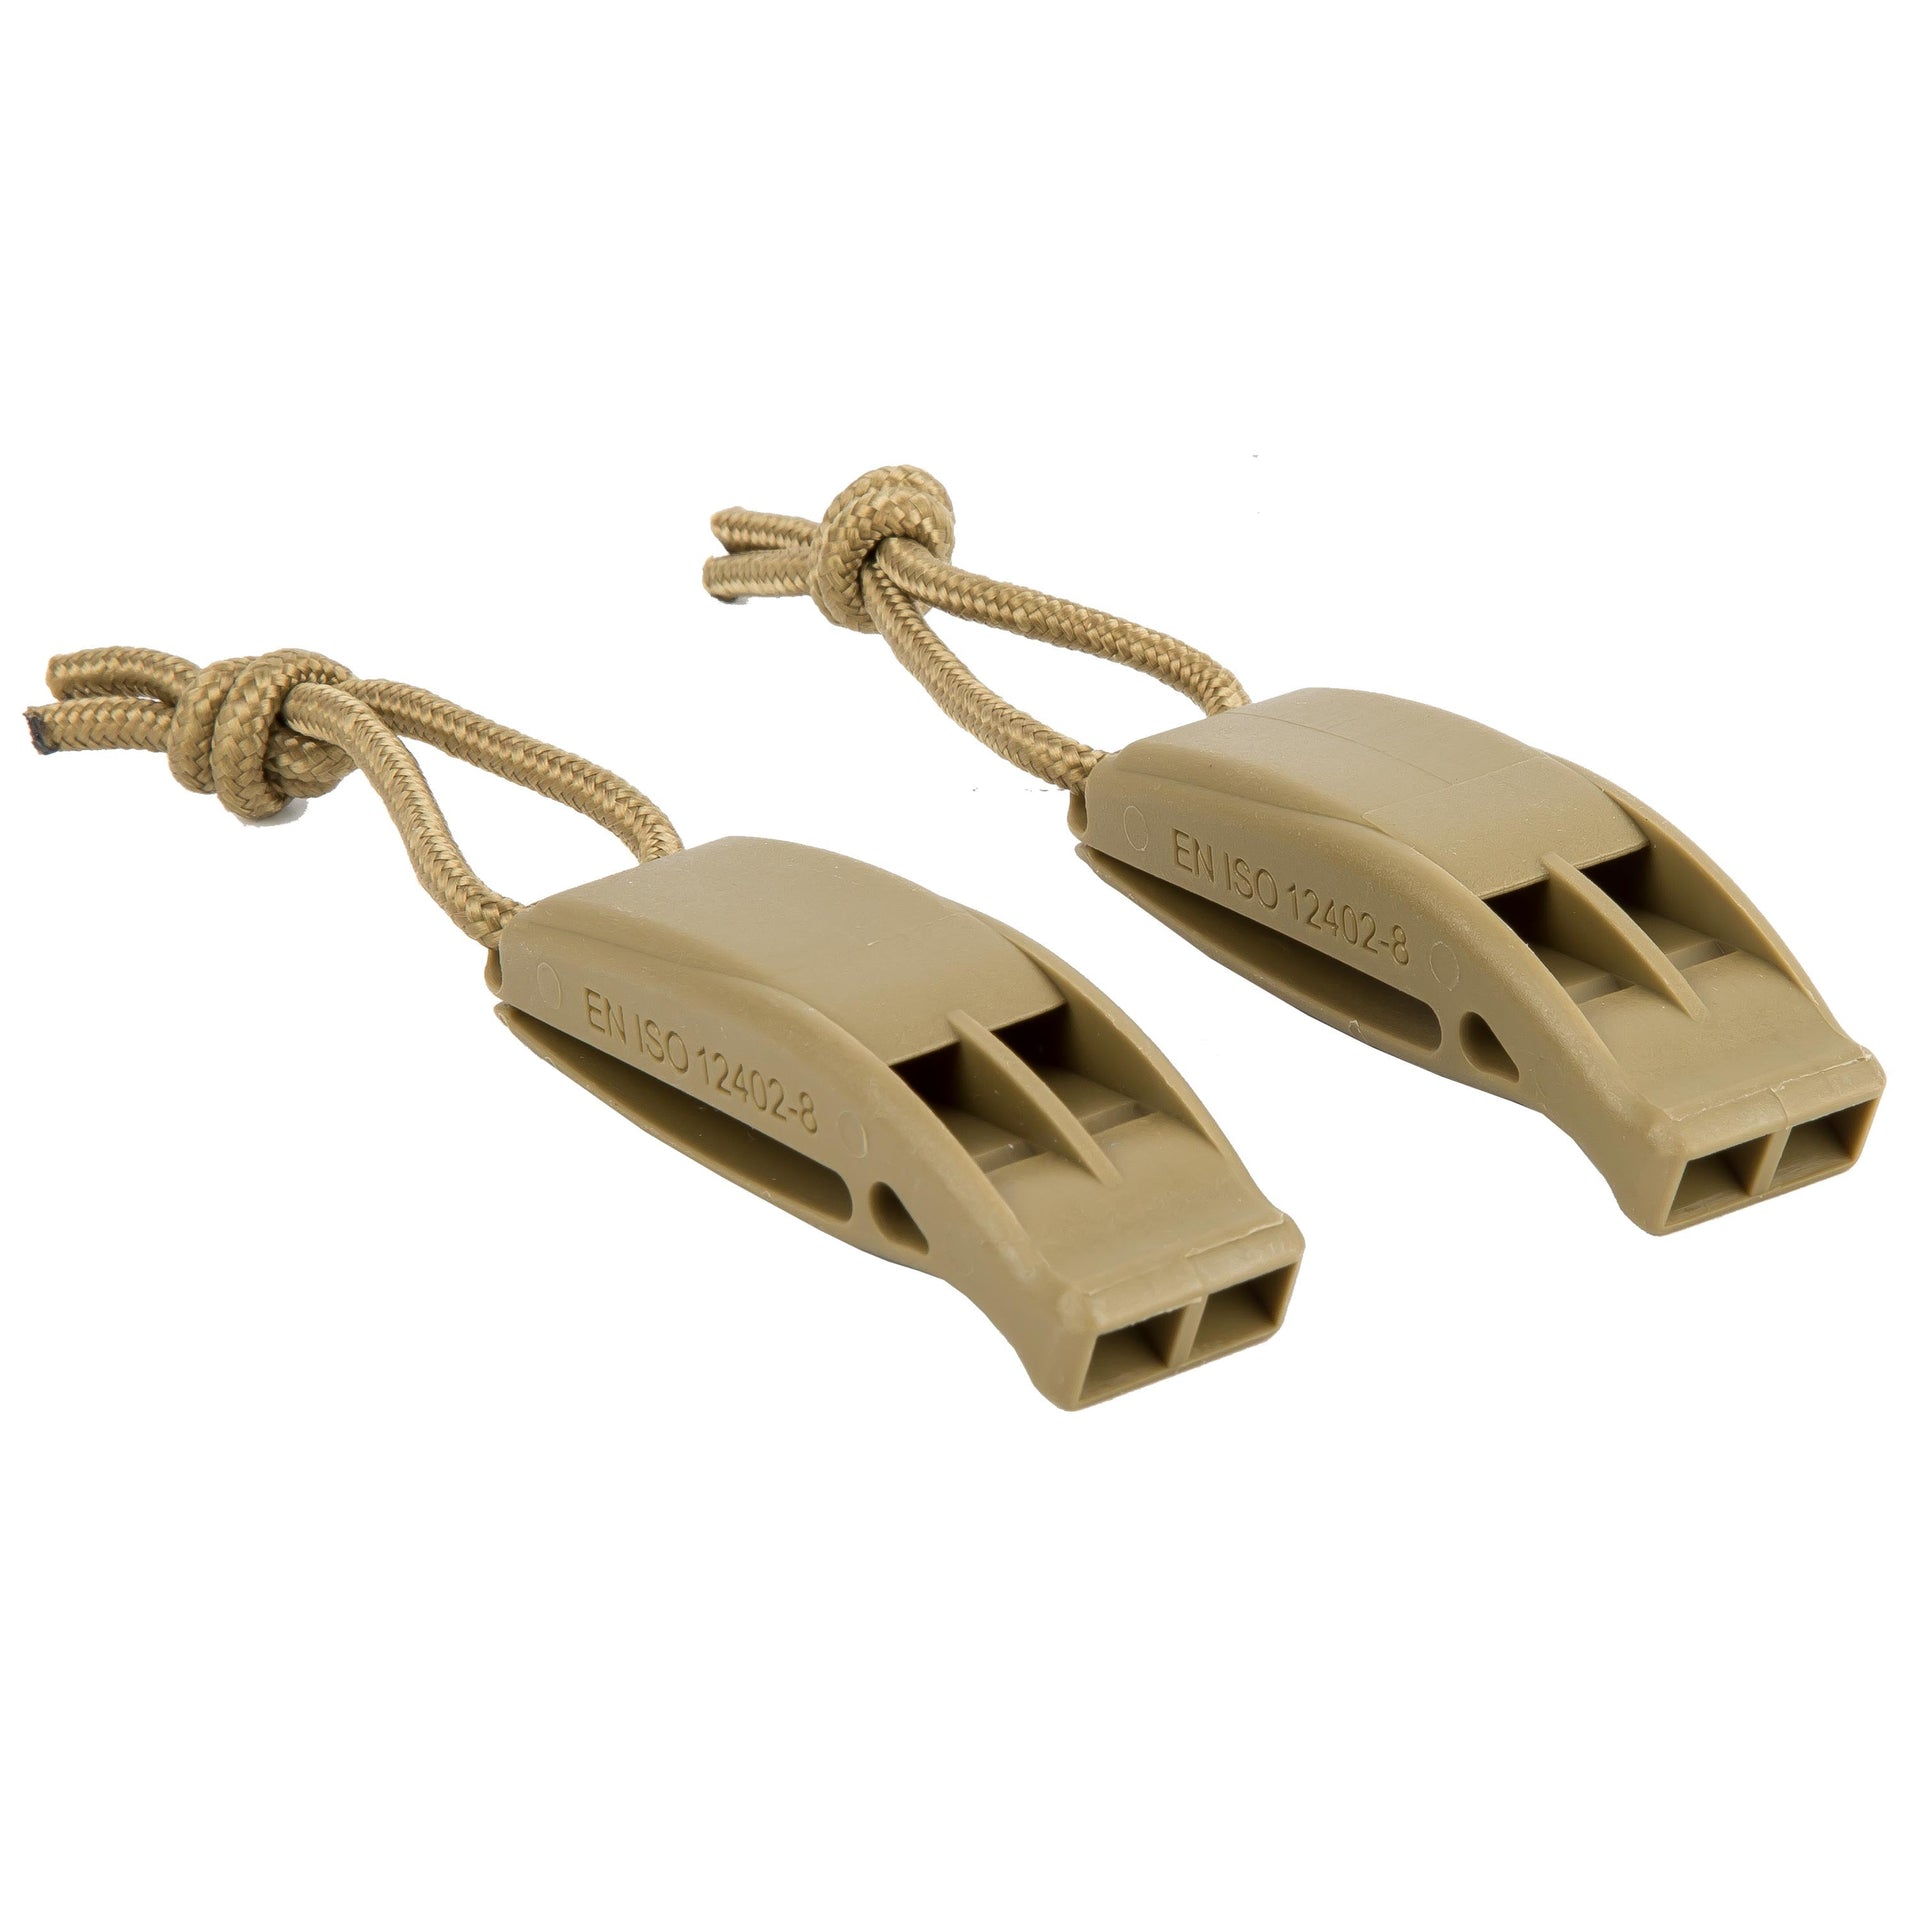 Signal Whistle Tactical Molle 2-Pack